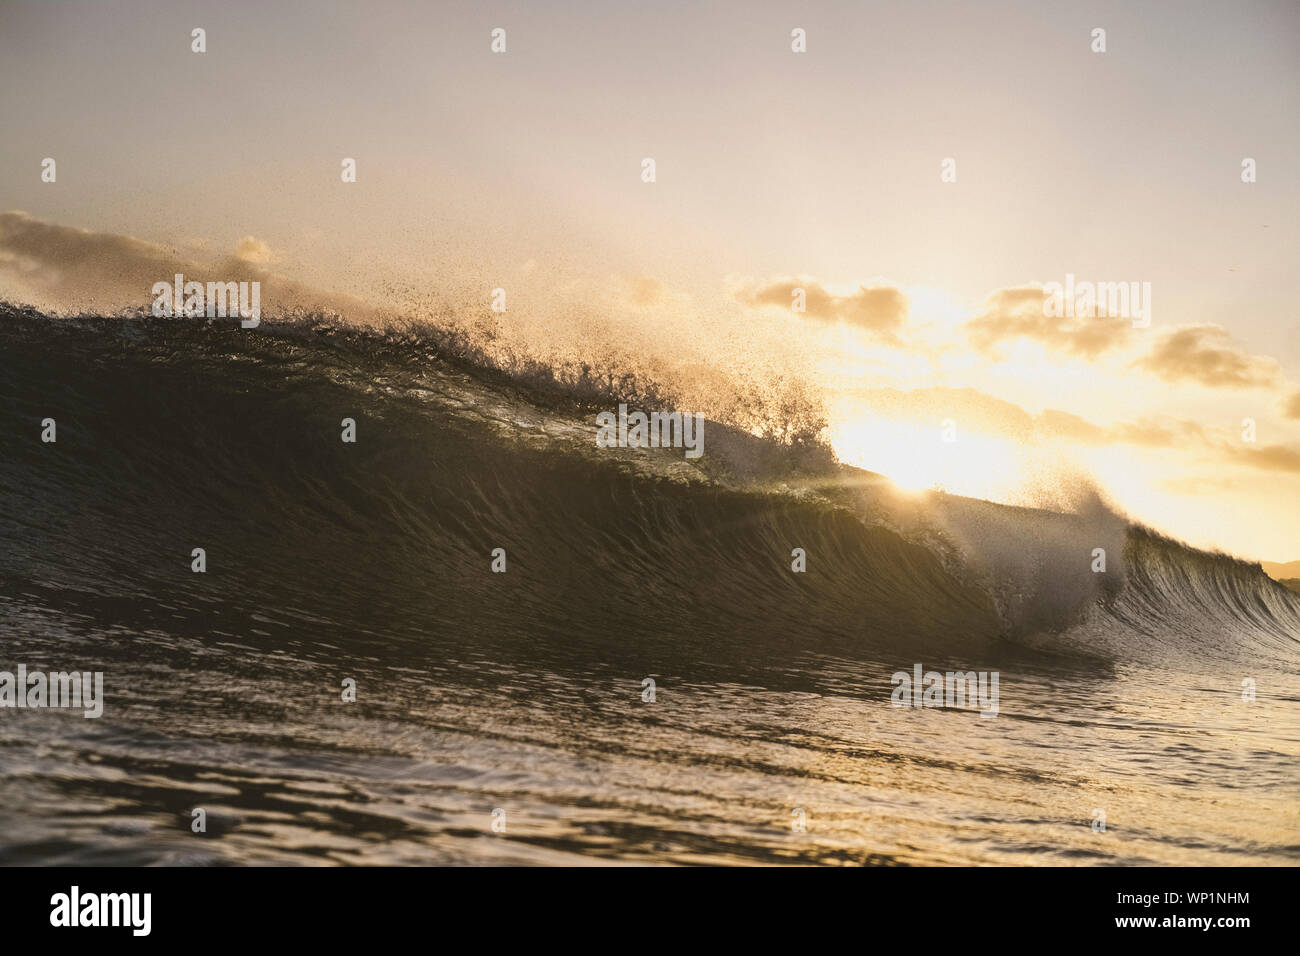 Backlit scene of a wave breaking at sunset Stock Photo